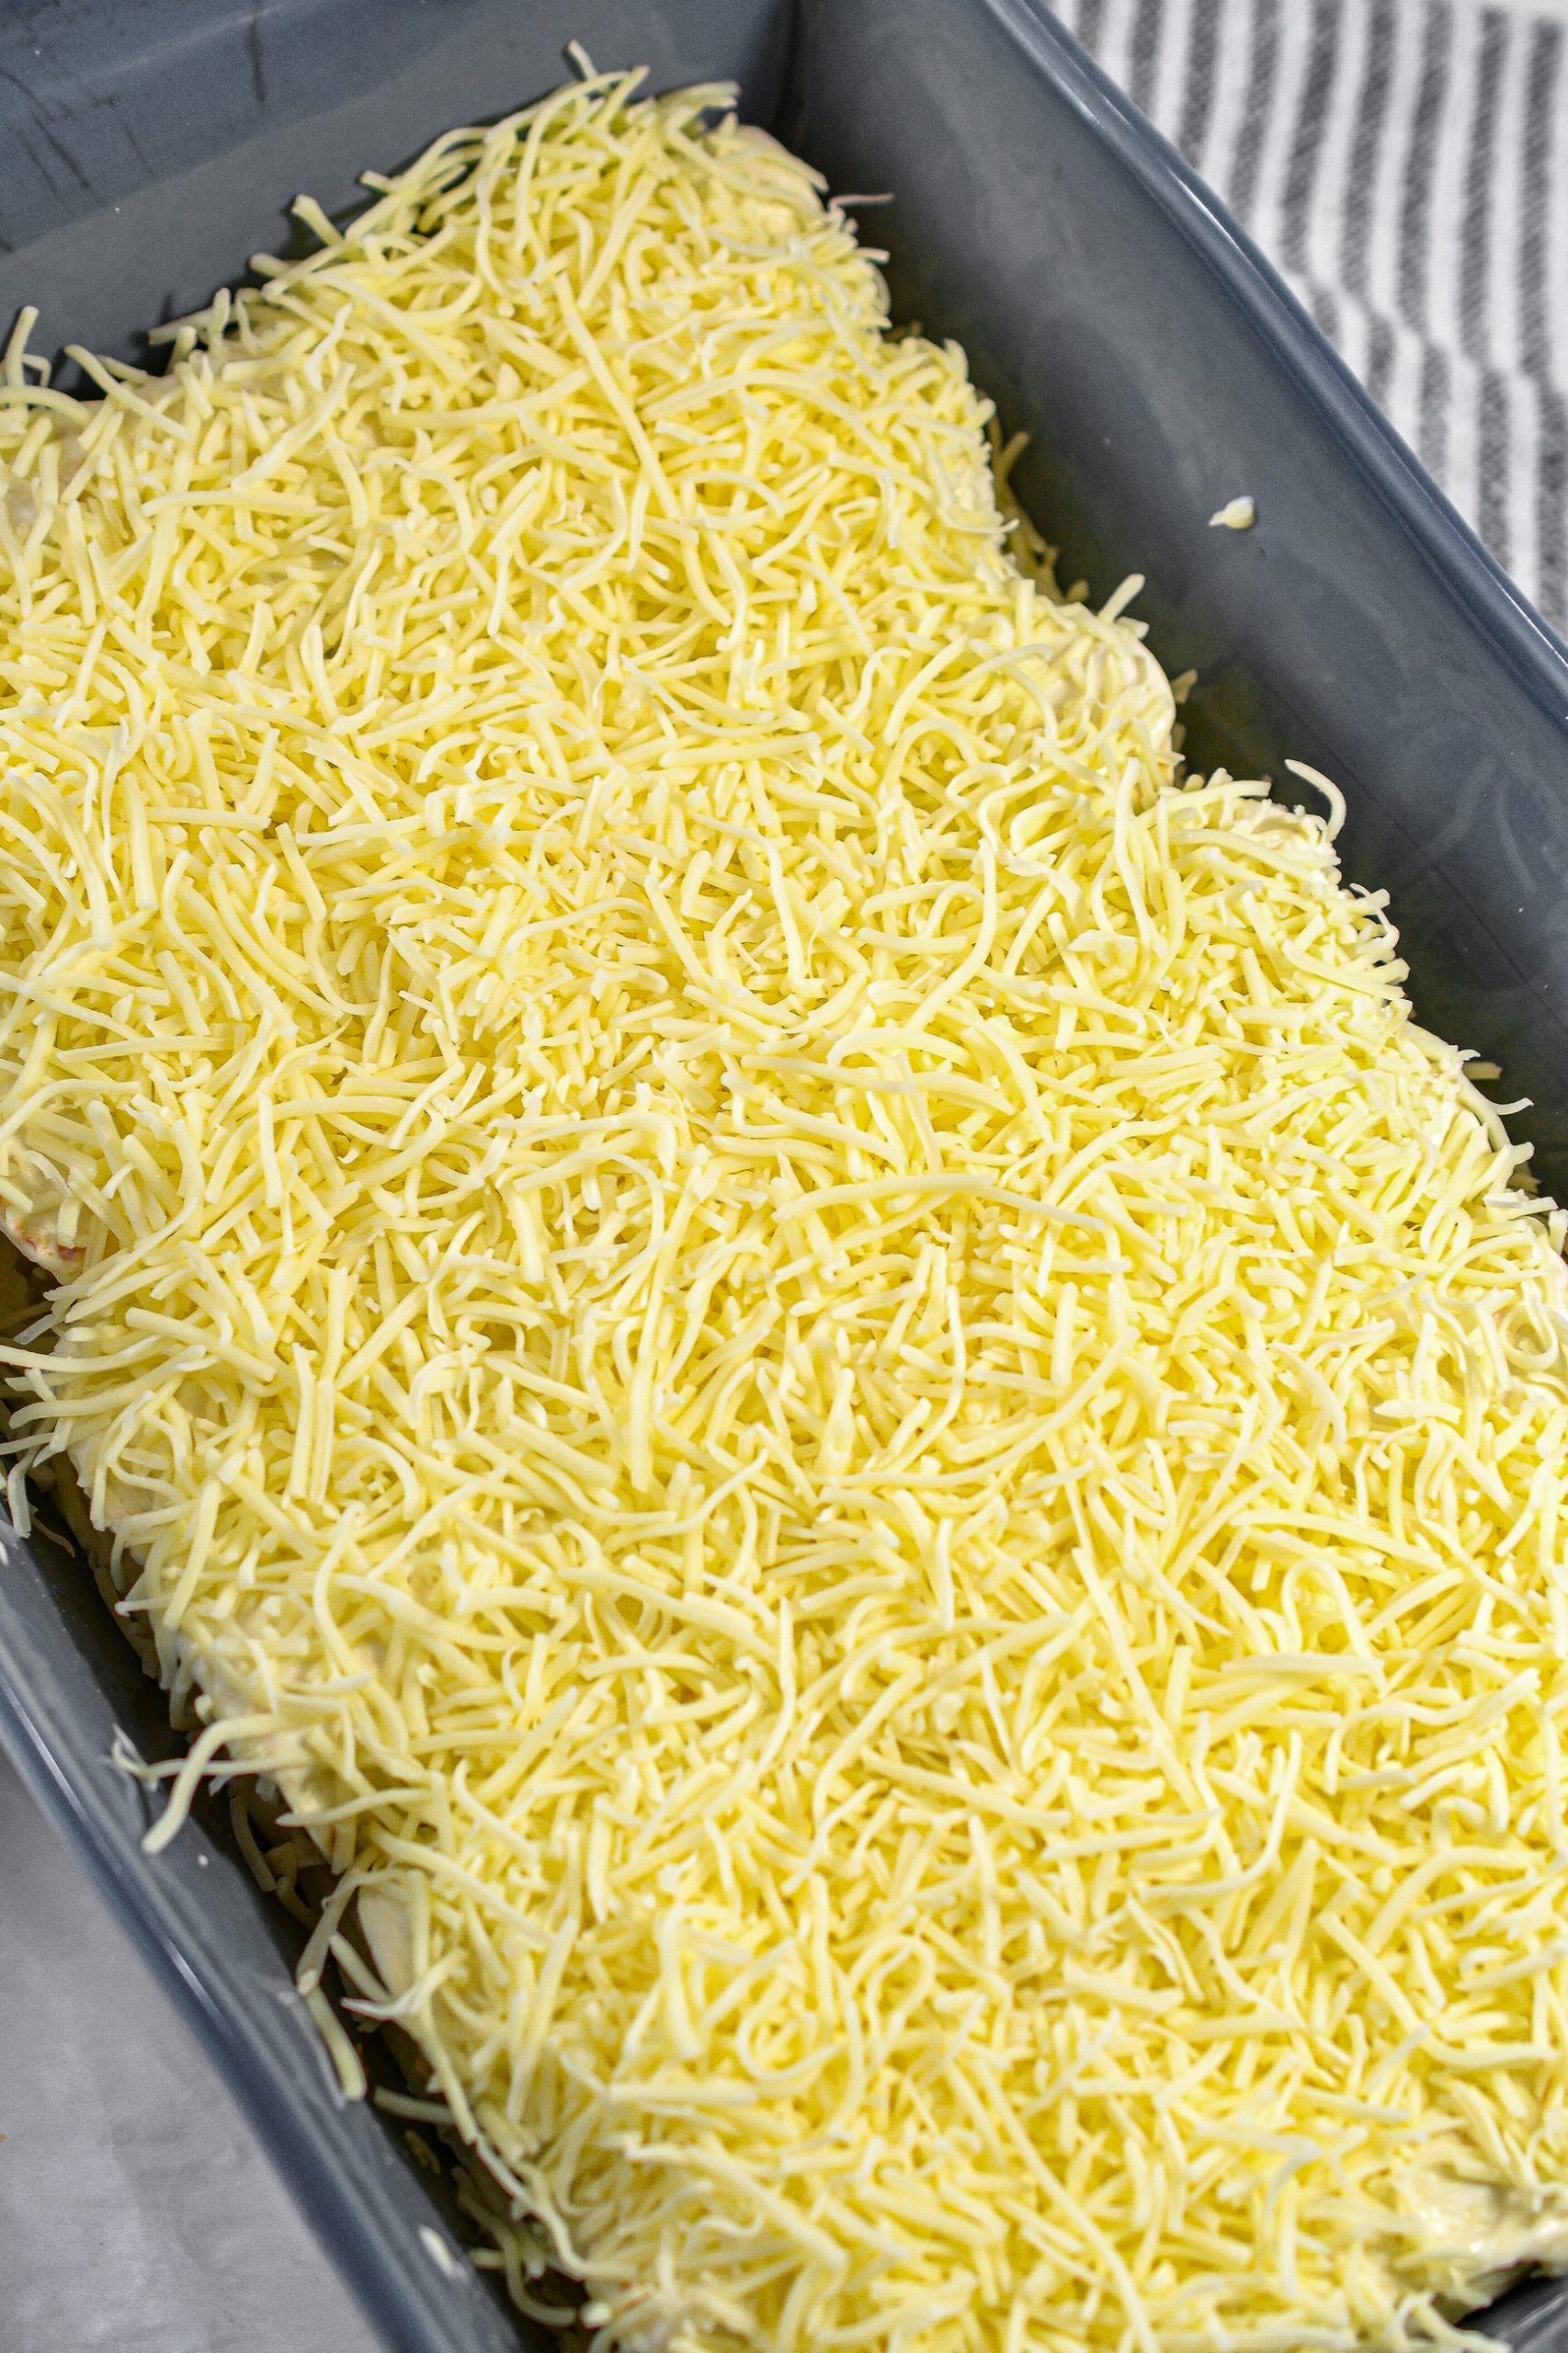 Top the enchiladas with the remaining sour cream sauce and sprinkle with the other half of the cheese.